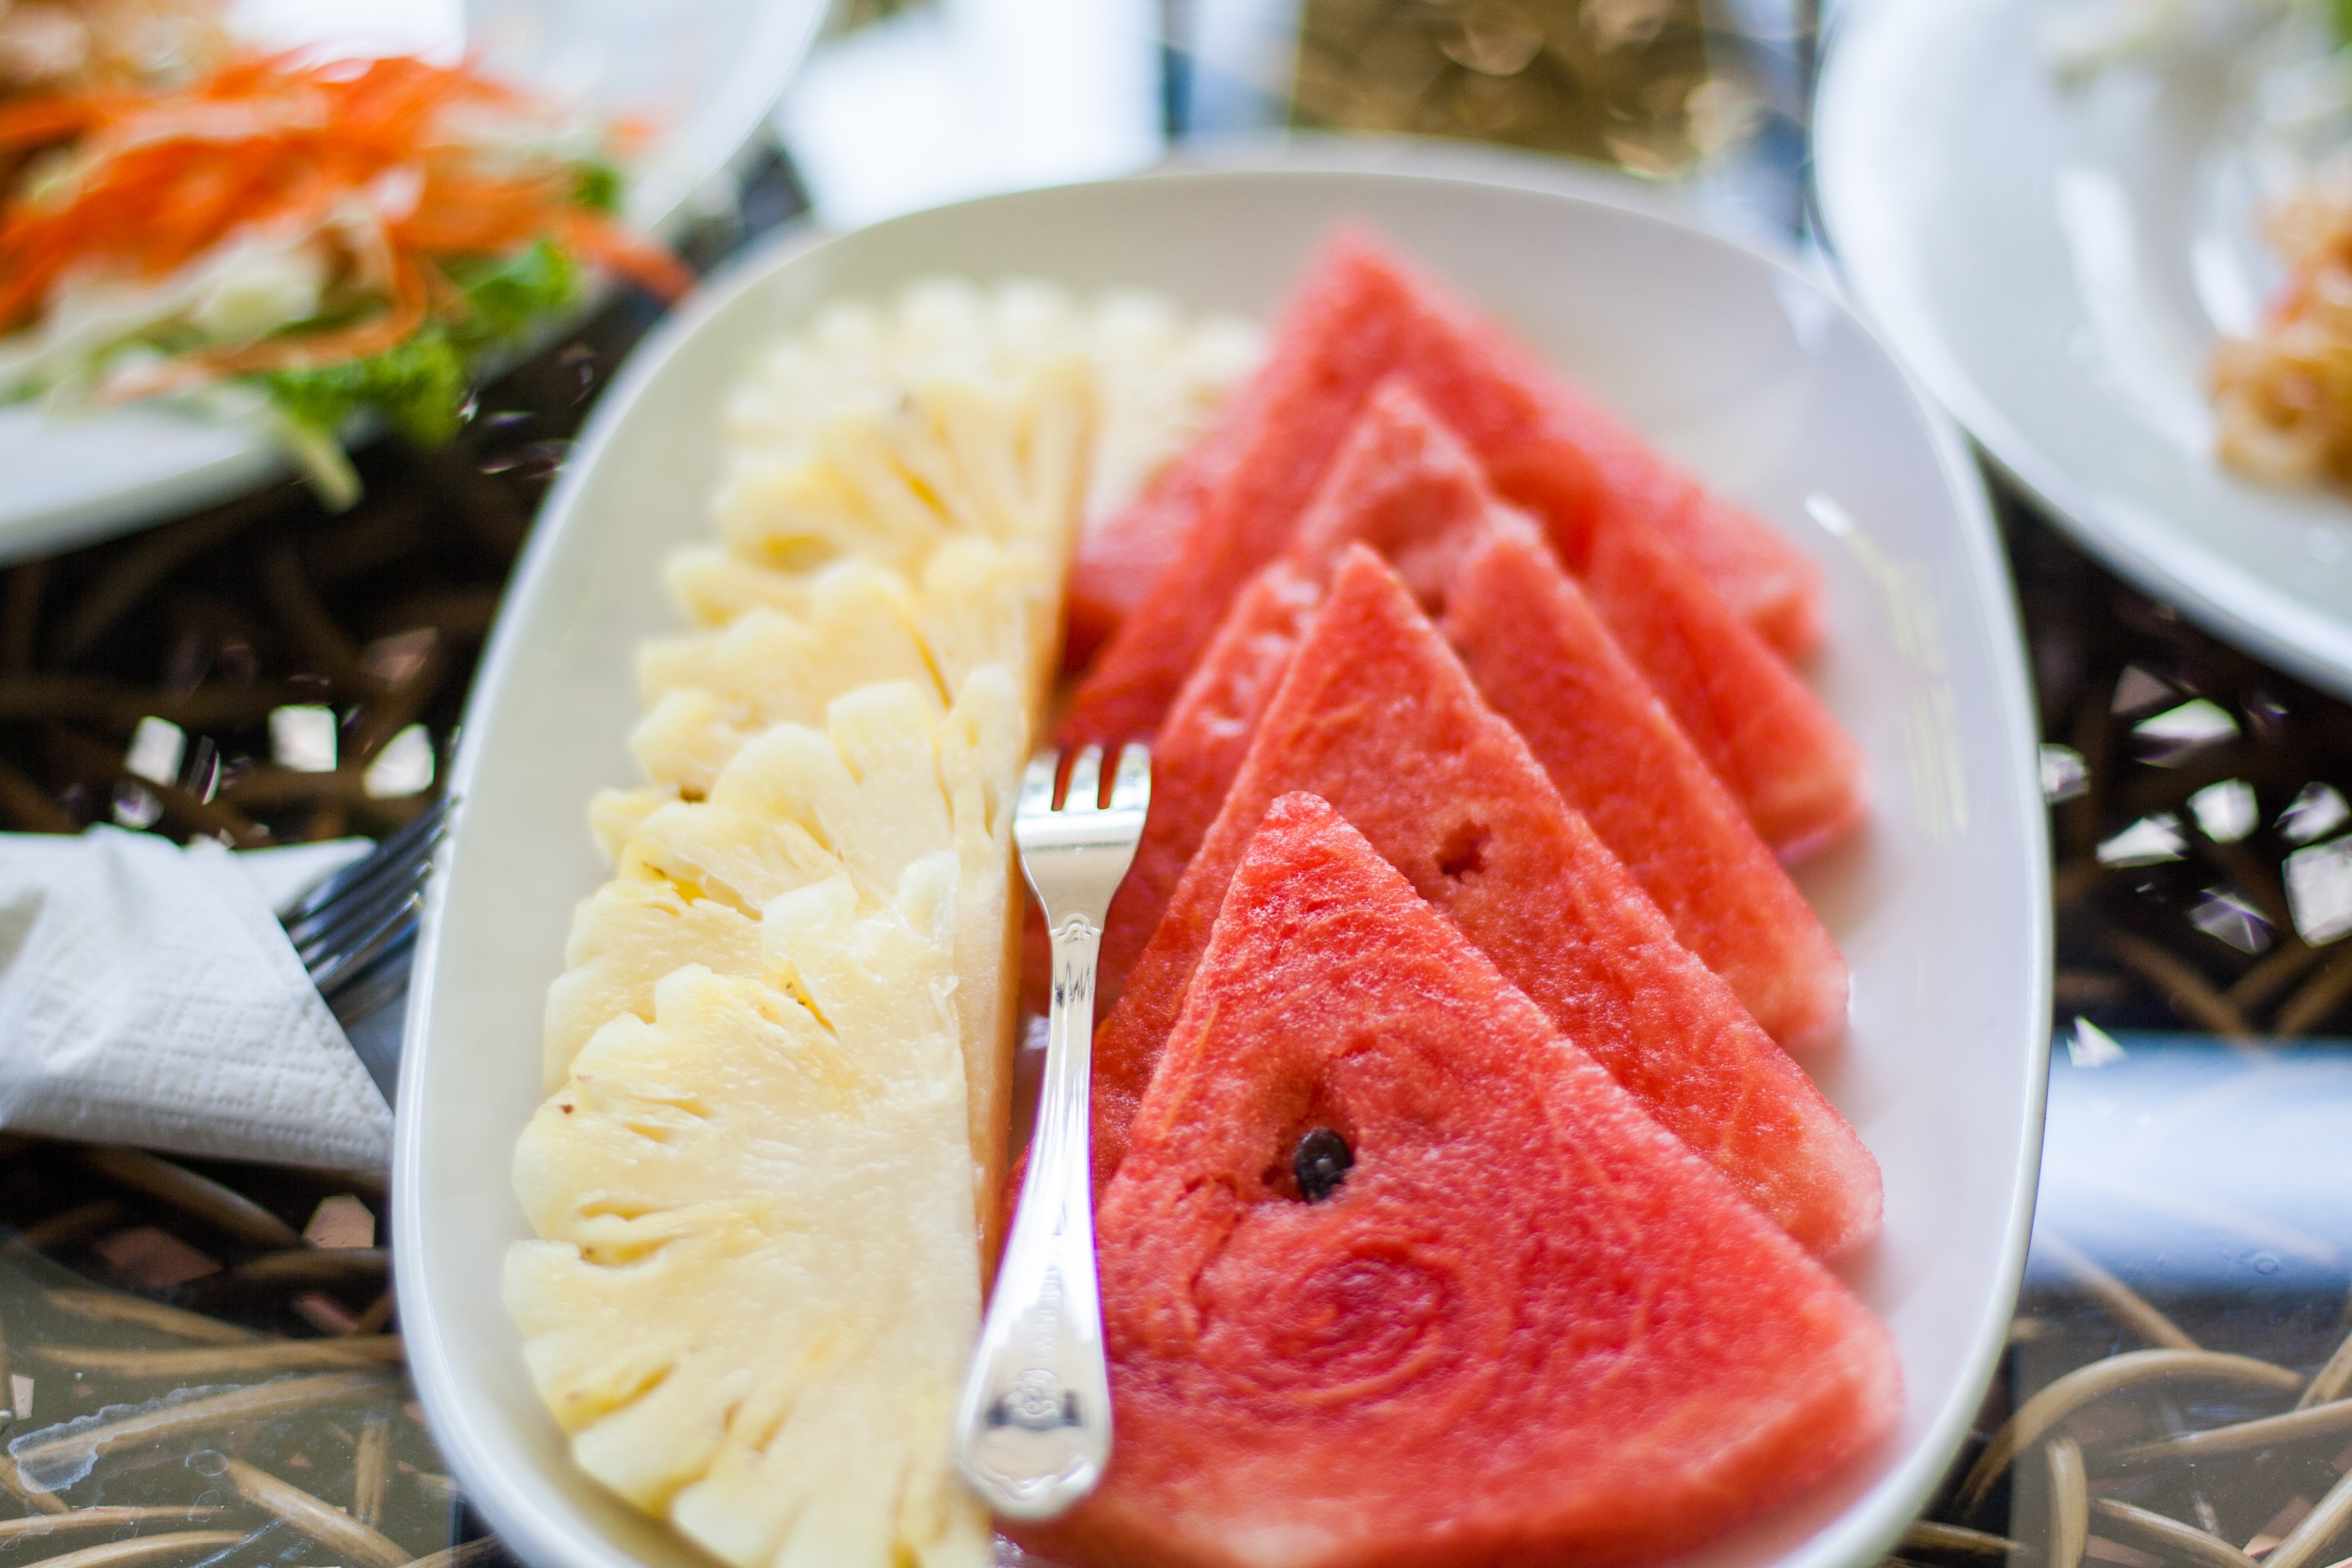 slices of watermelon and pineapple served on white rectangular plate